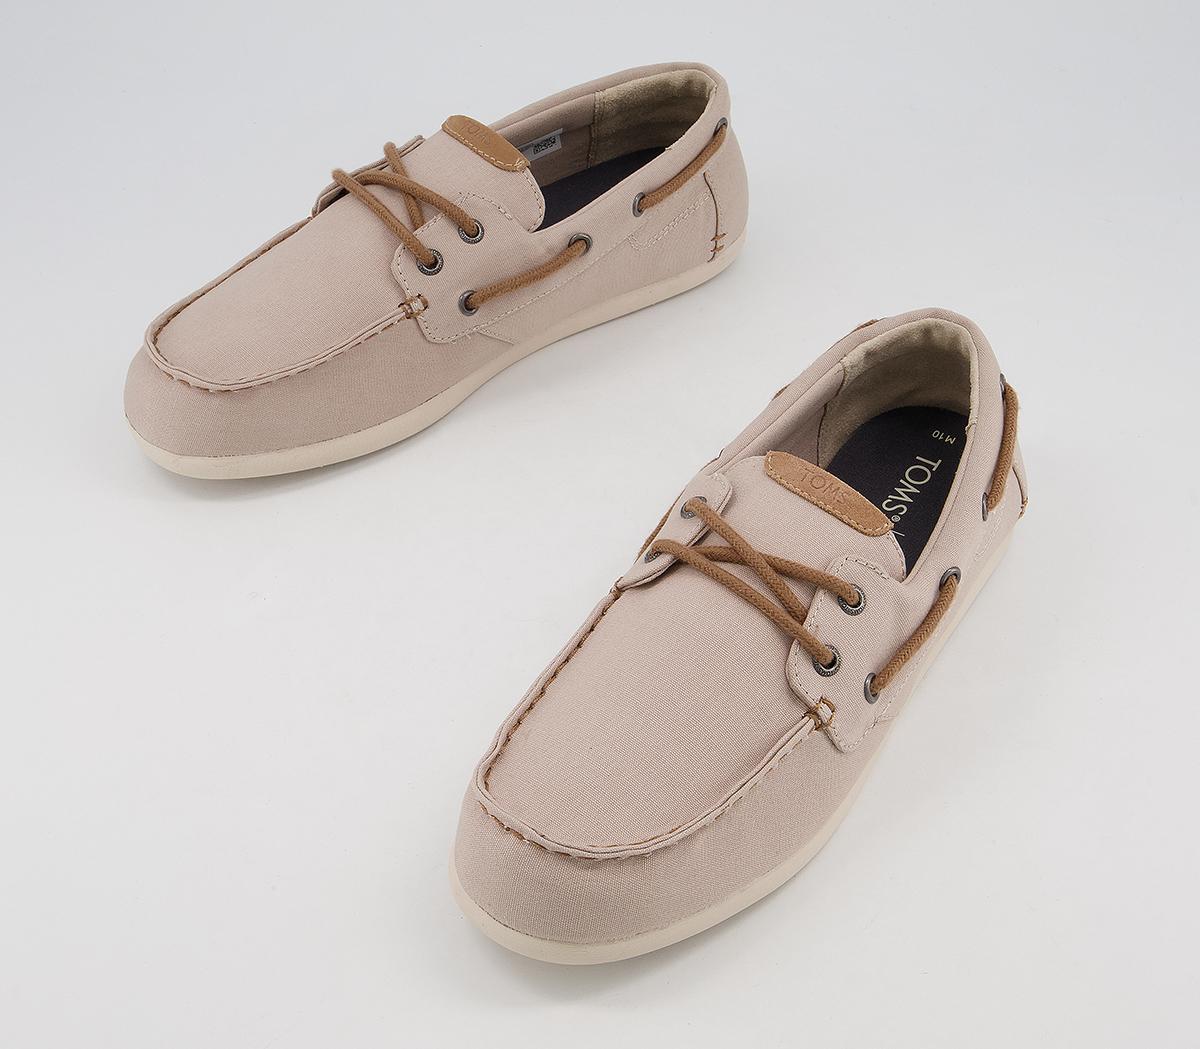 TOMS Claremont Boat Shoes Tan - Boat Shoes